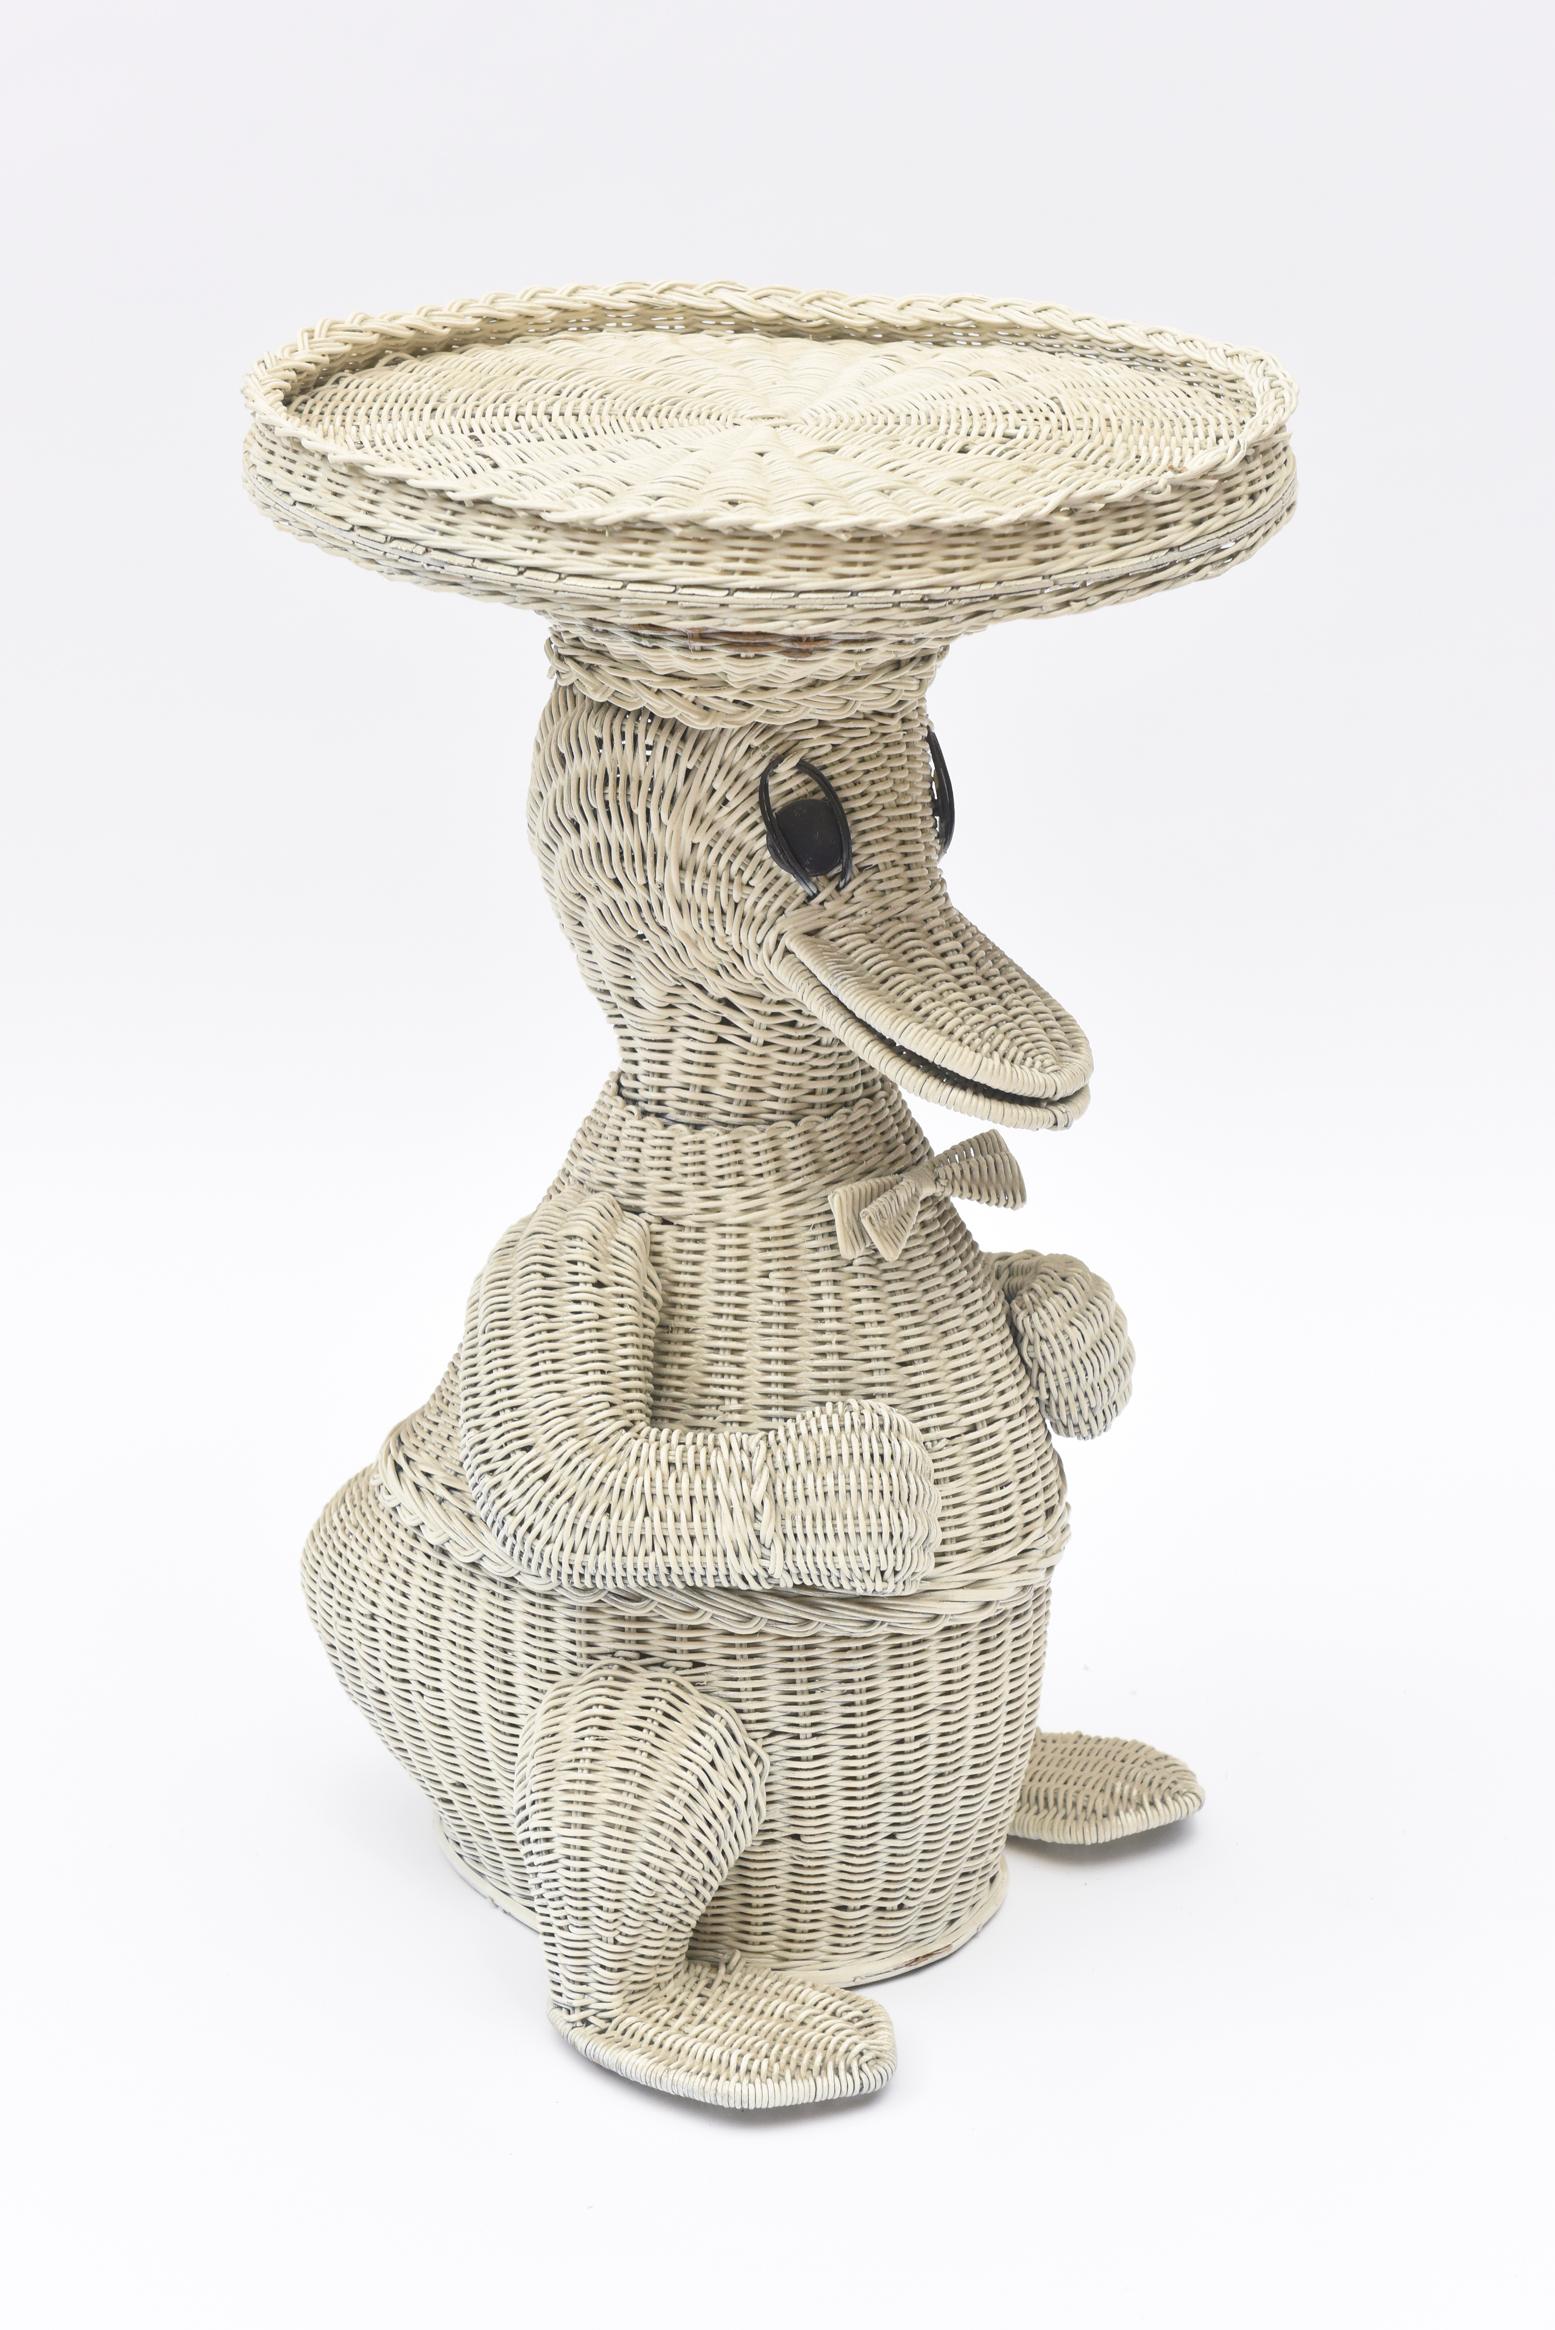 This precious duck with his bow tie and removable tray table top should make a baby or small child leap for joy. Created in the 1950s of wicker, he is the perfect addition to a nursery, bearing a resemblance to Donald, a favorite duck character